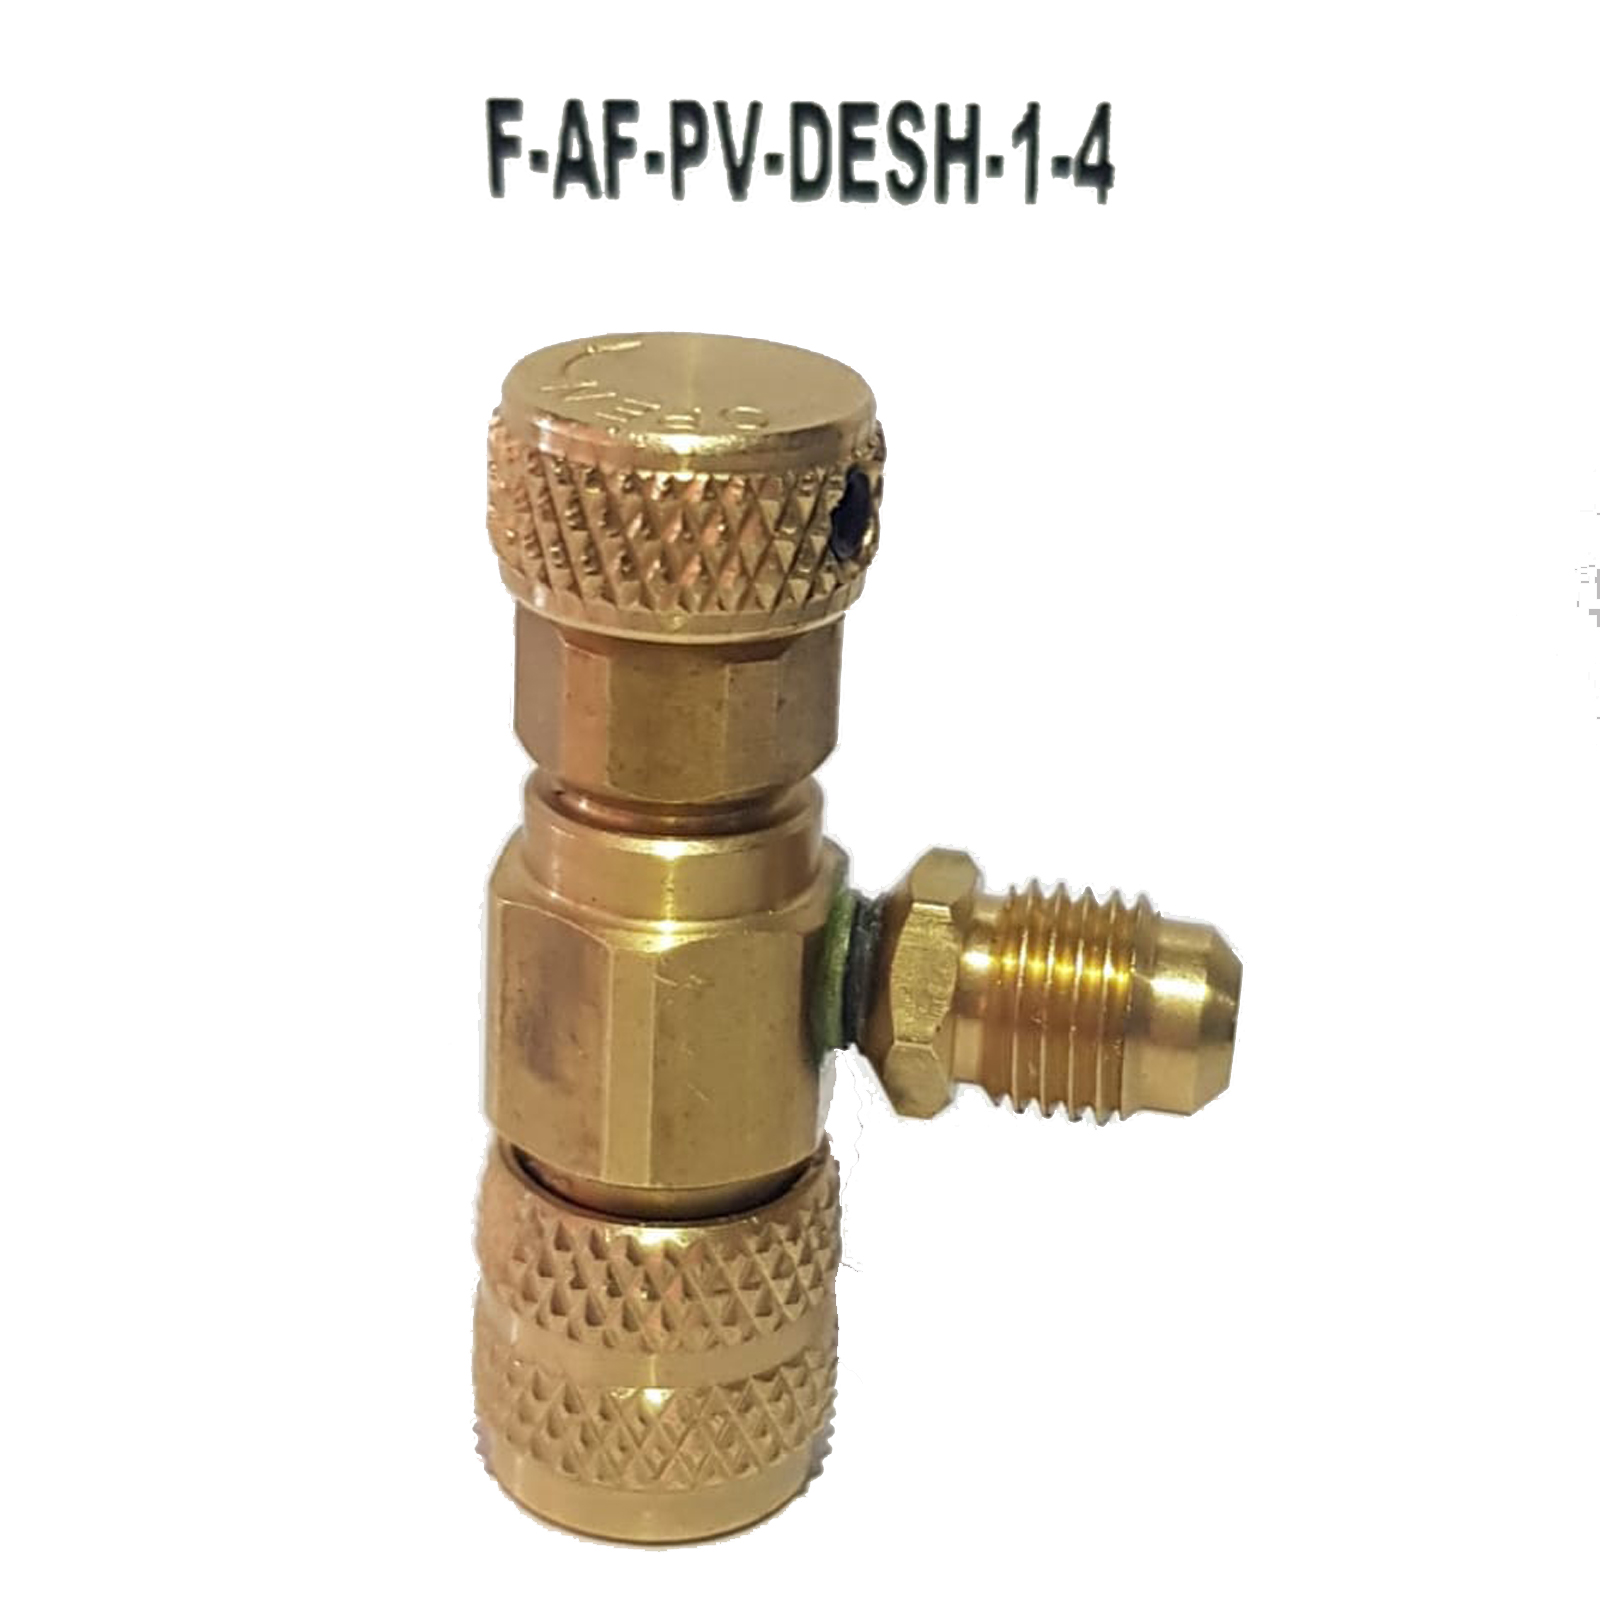 Retention control valve (shut-off) with depressor, for Schrader needle valves - 1/4 SAE female inlet and 1/4 SAE male side outlet - made in USA